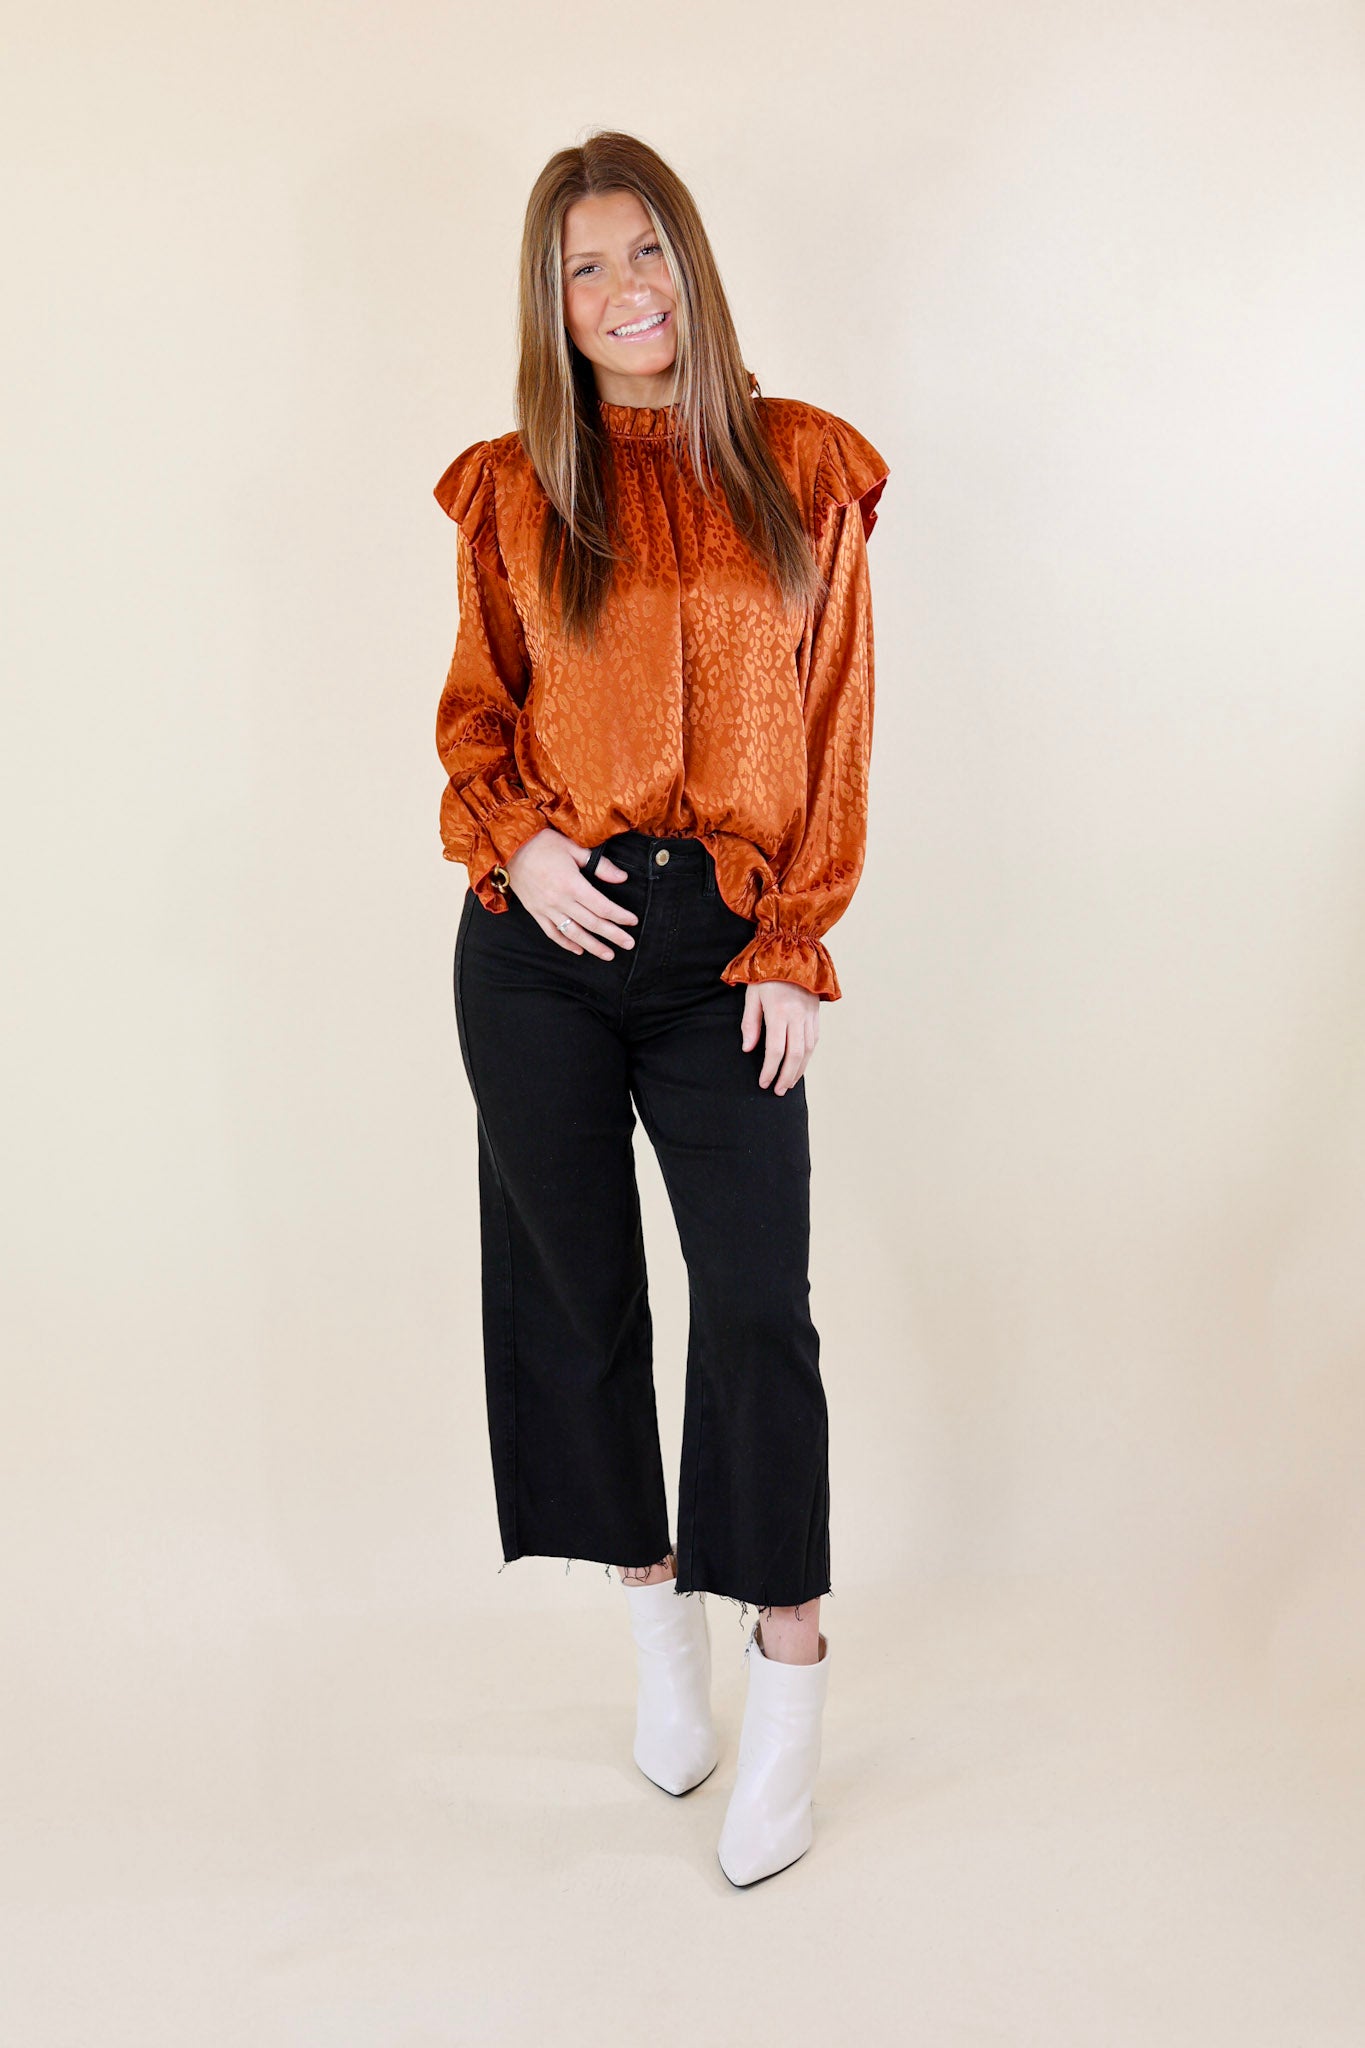 Can't Stop Me Ruffle Mock Neck Long Sleeve Leopard Print Satin Top in Rust Orange - Giddy Up Glamour Boutique